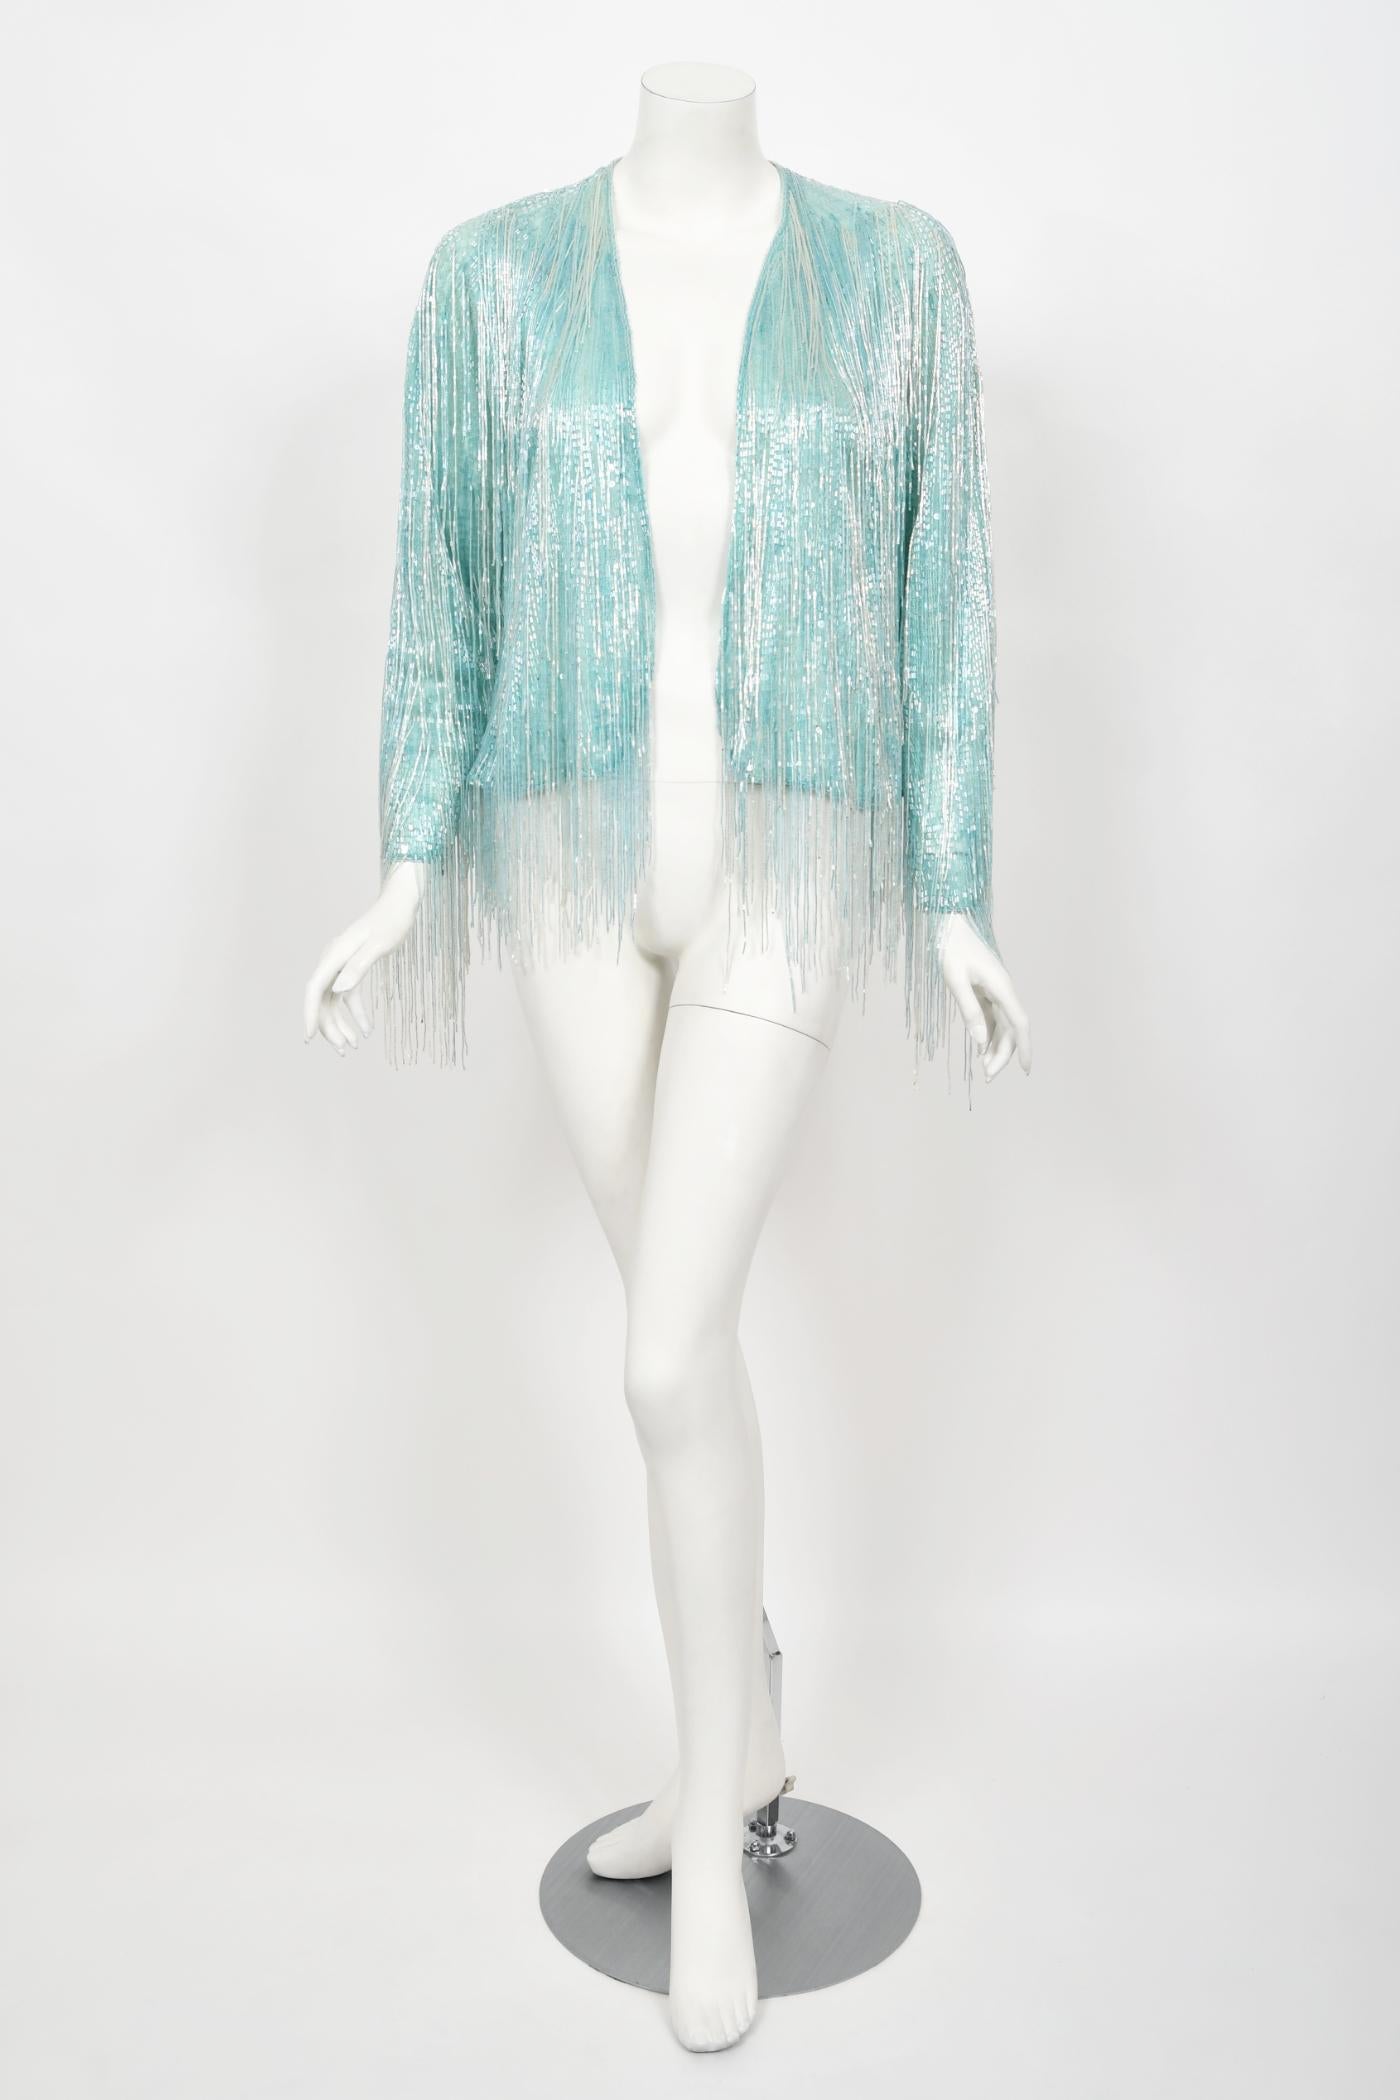 A truly epic and instantly recognizable Halston couture ice blue semi-sheer beaded silk cardigan jacket dating back to the mid 1970's. Halston revolutionized the way women dress and is one of the few designers, alongside Claire McCardell and Norman